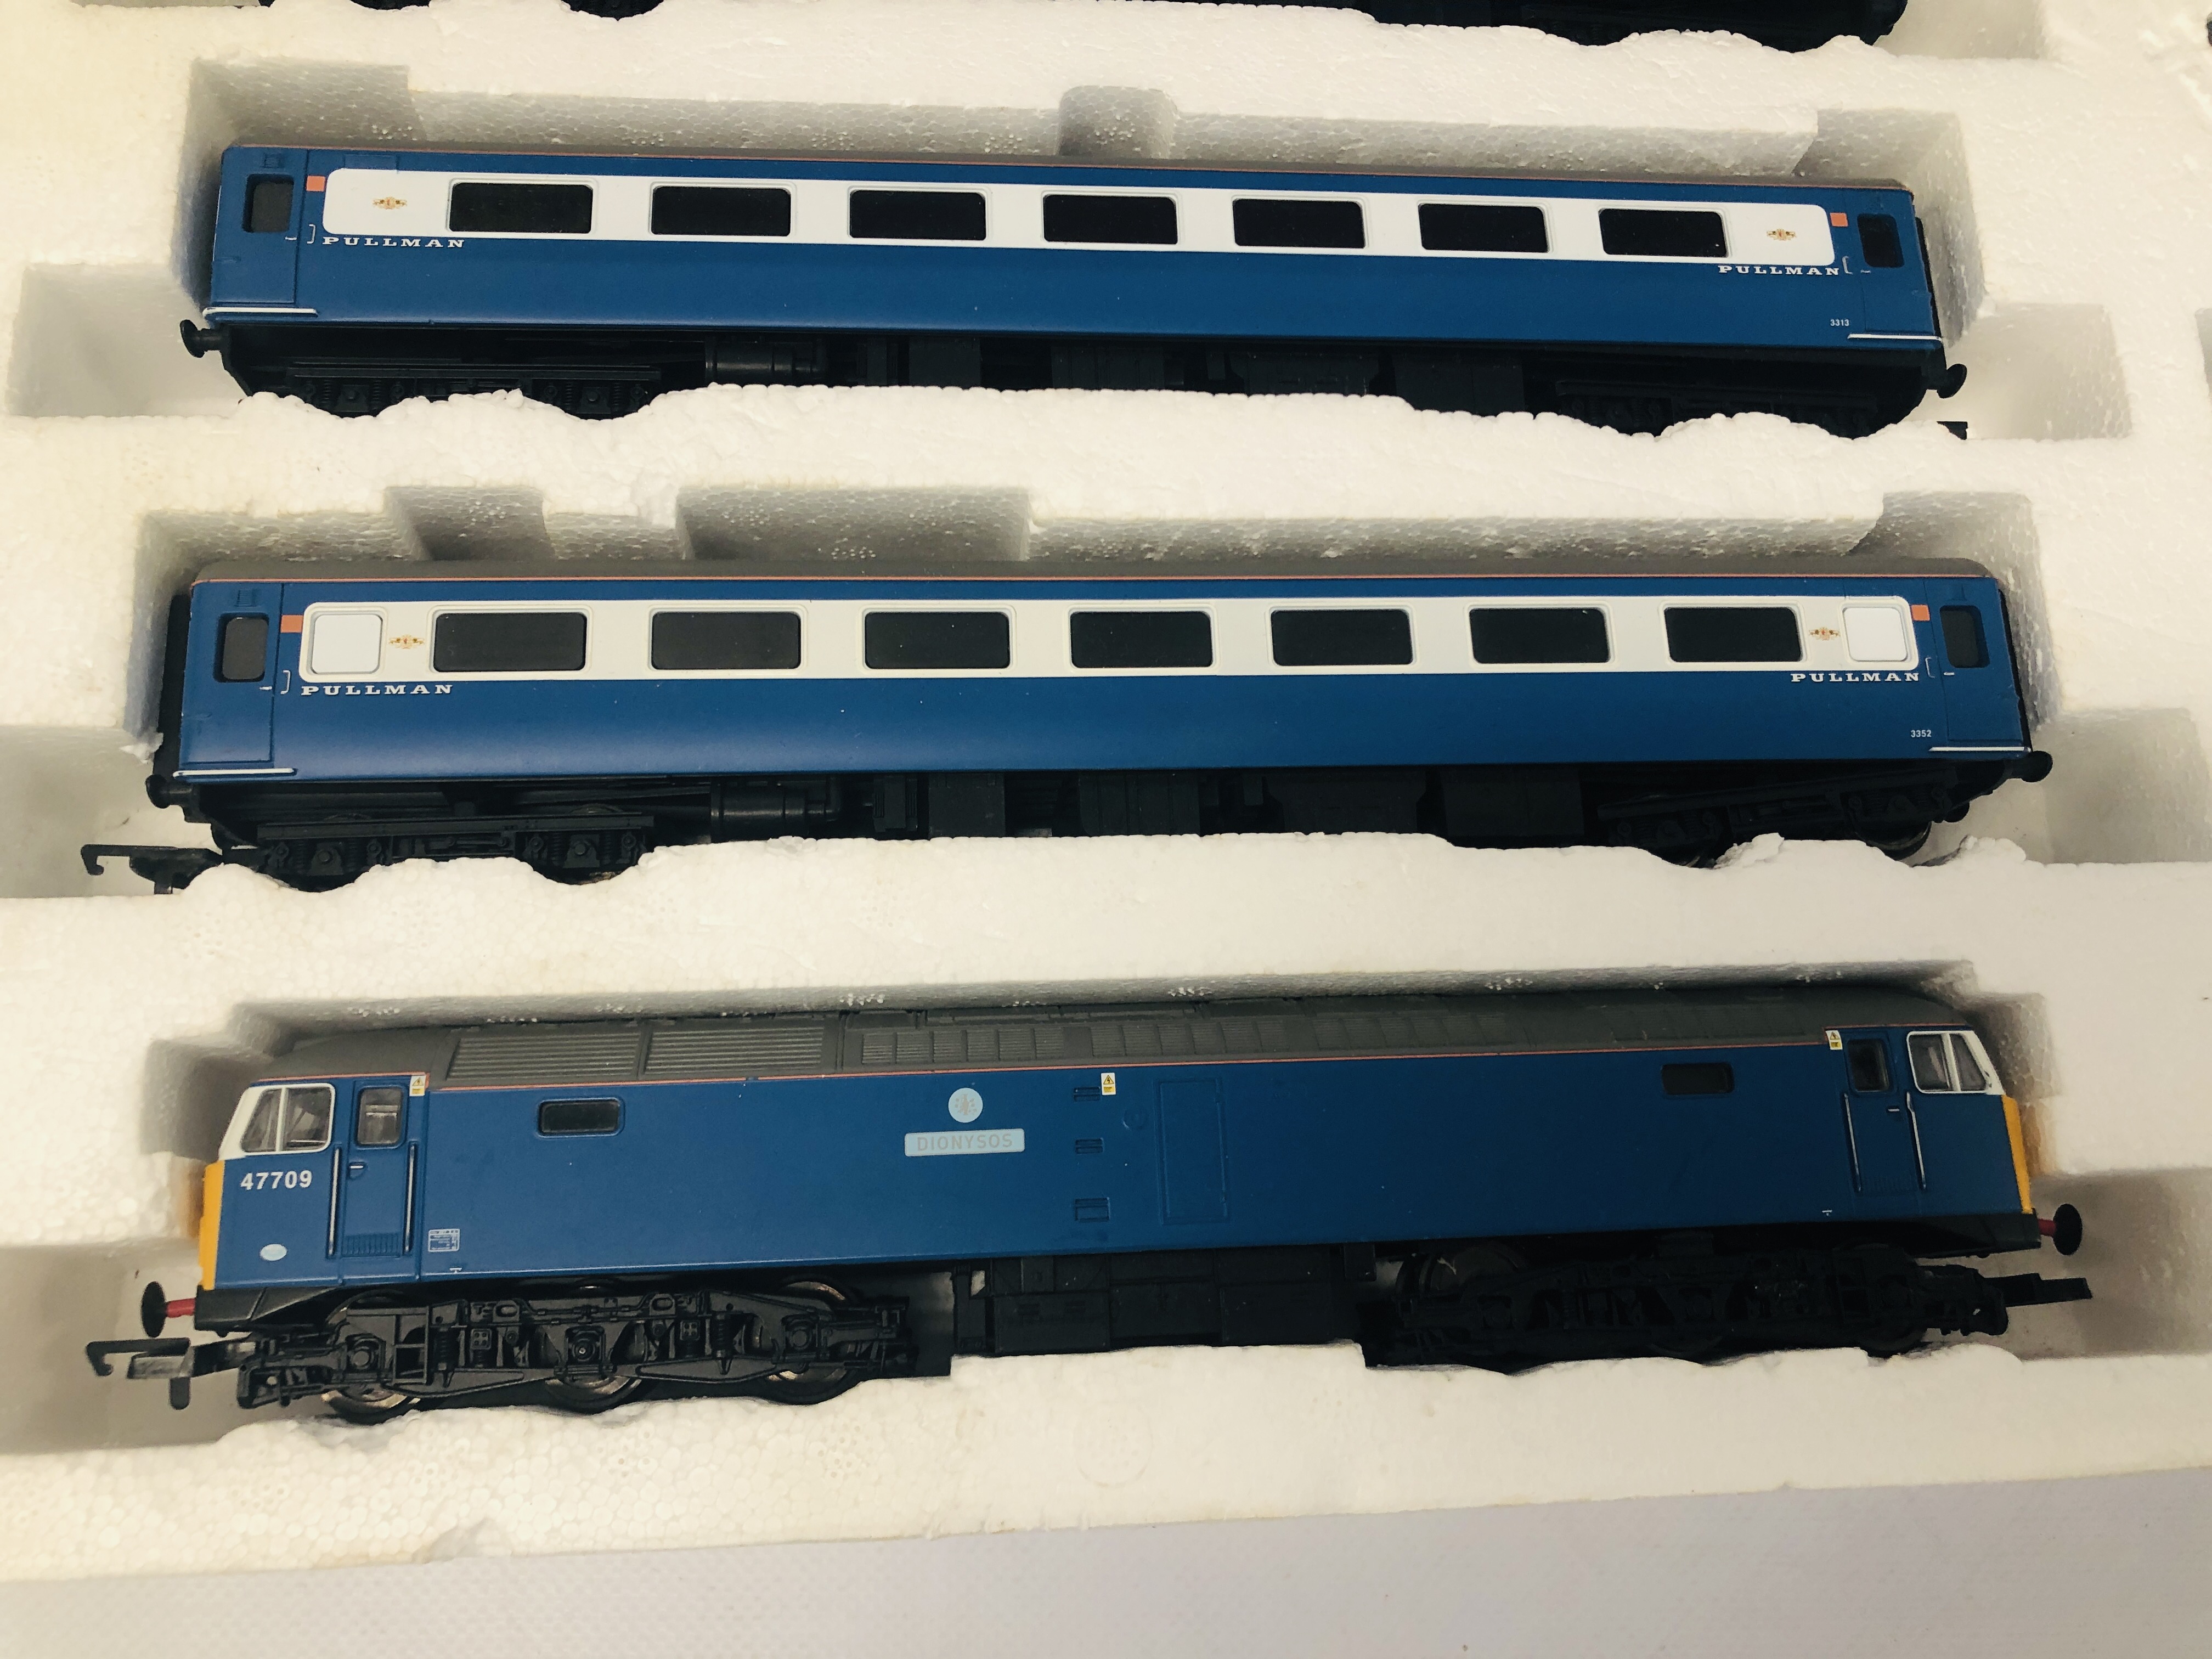 HORNBY "THE BLUE PULLMAN" 00 GAUGE R1093 ELECTRIC TRAIN SET BOXED - SOLD AS SEEN - Image 3 of 7